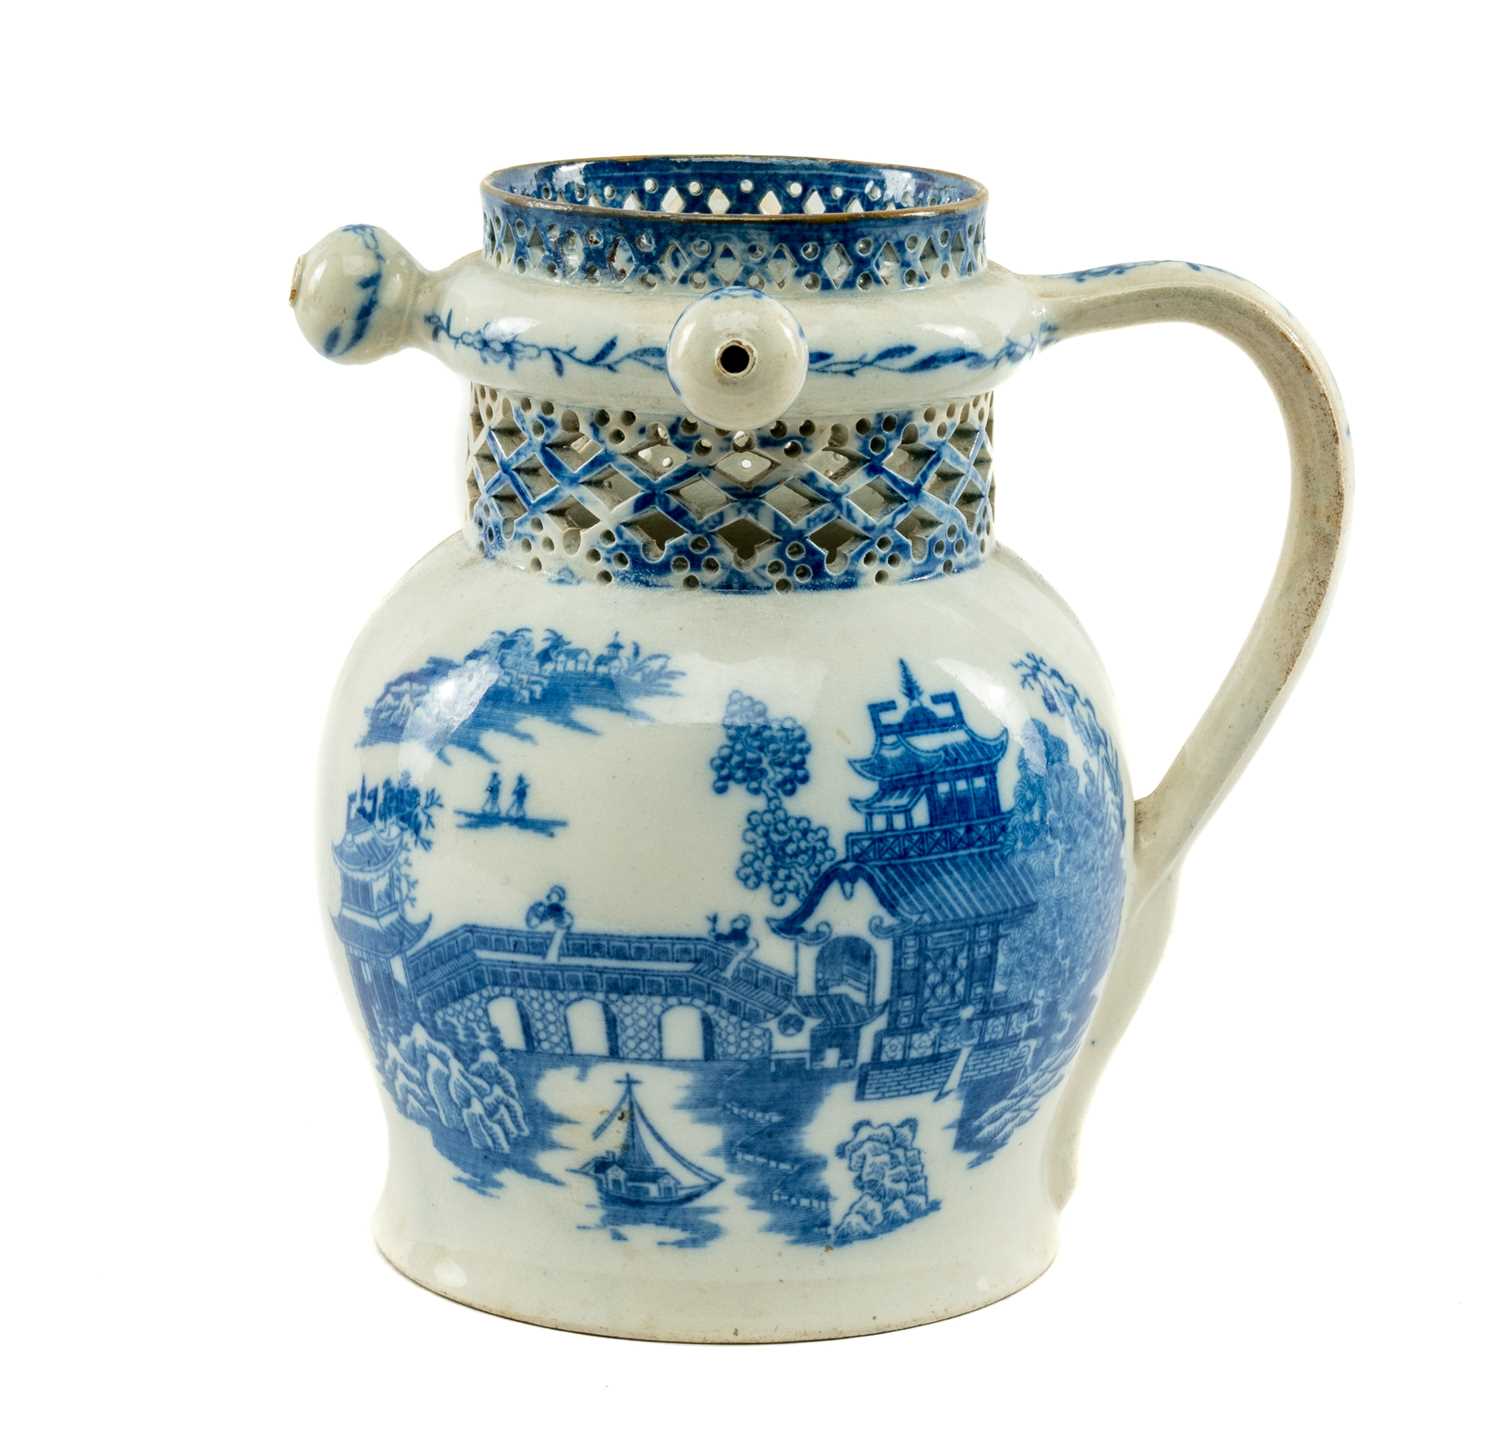 SWANSEA CAMBRIAN PEARLWARE PUZZLE JUG circa 1810, printed in blue with the 'Longbridge' pattern,